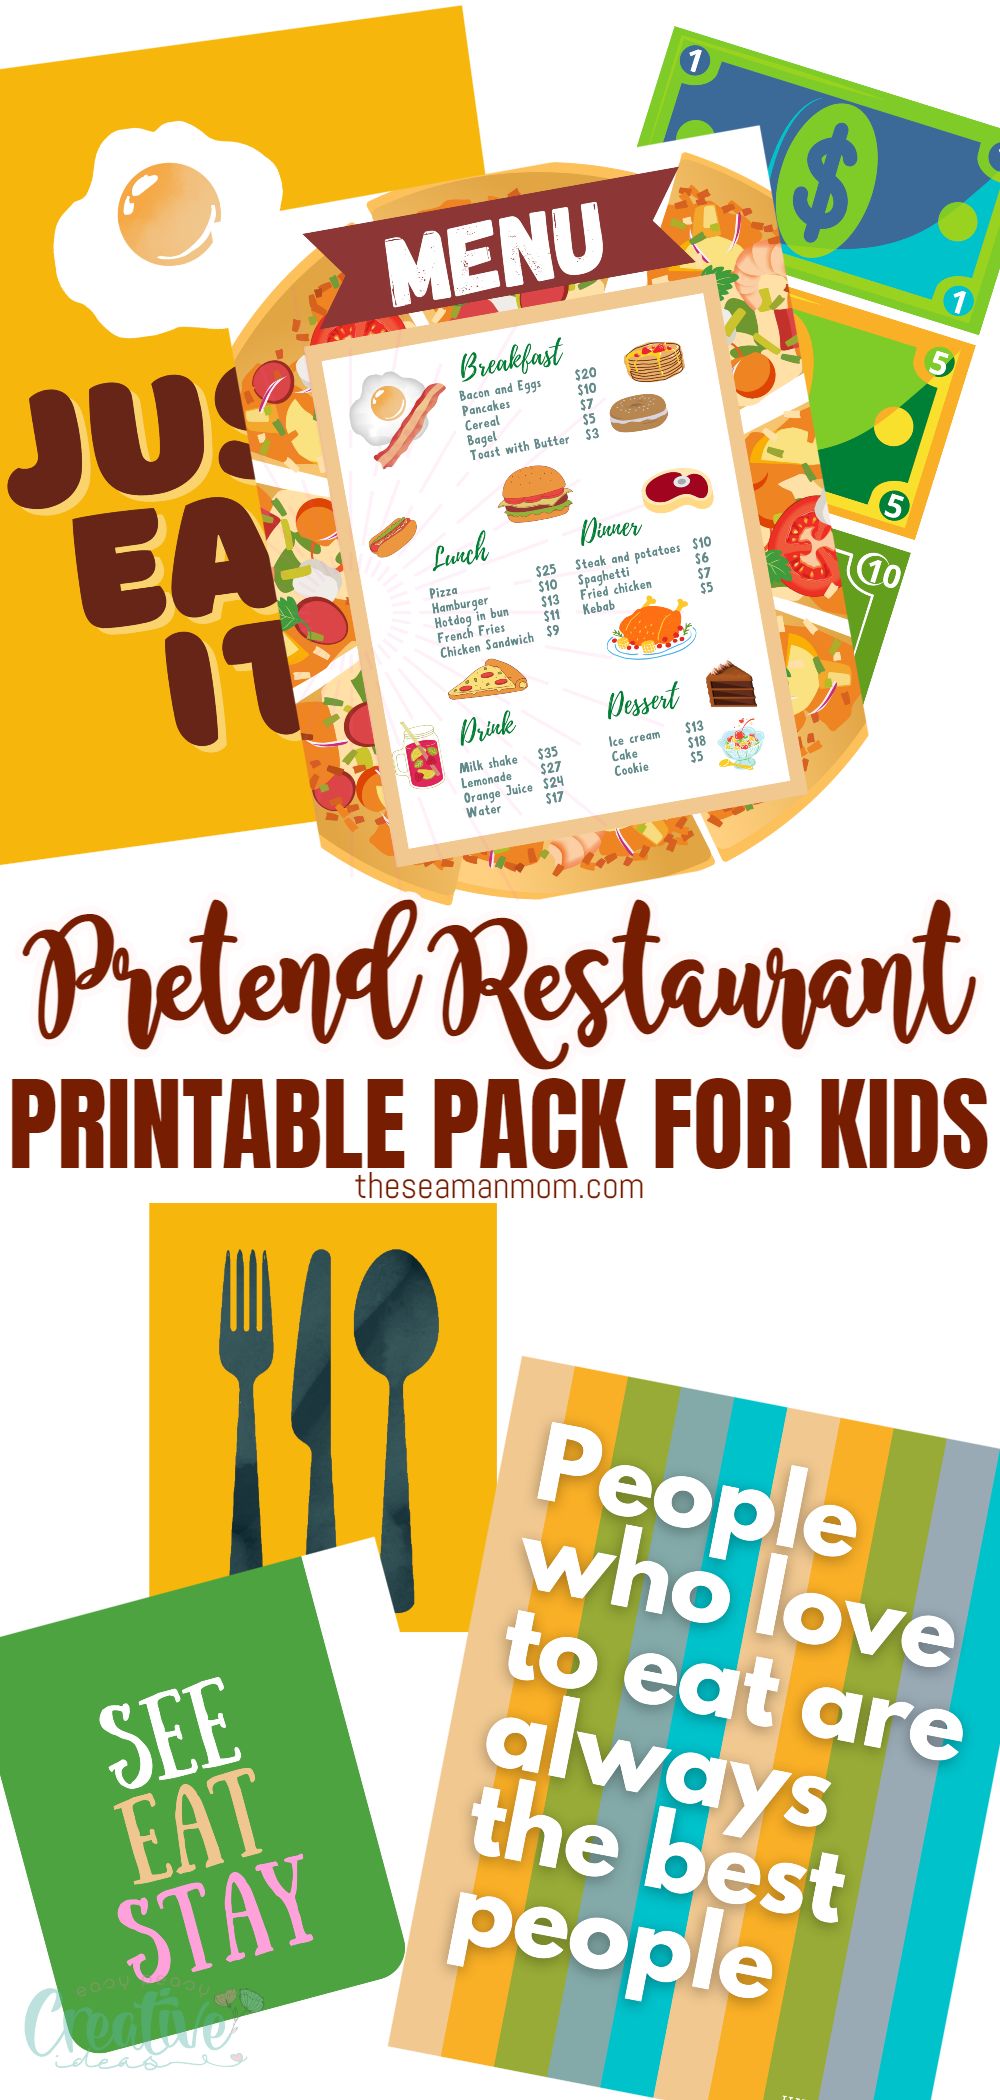 Dramatic play is a great way for your kids to act out real-world situations at home. But creating new play areas every time your child wants to play something new can be expensive and time consuming. With the help of this printable set for a pretend play restaurant, you can easily set up a pretend restaurant in your home for your child in a matter of minutes. via @petroneagu